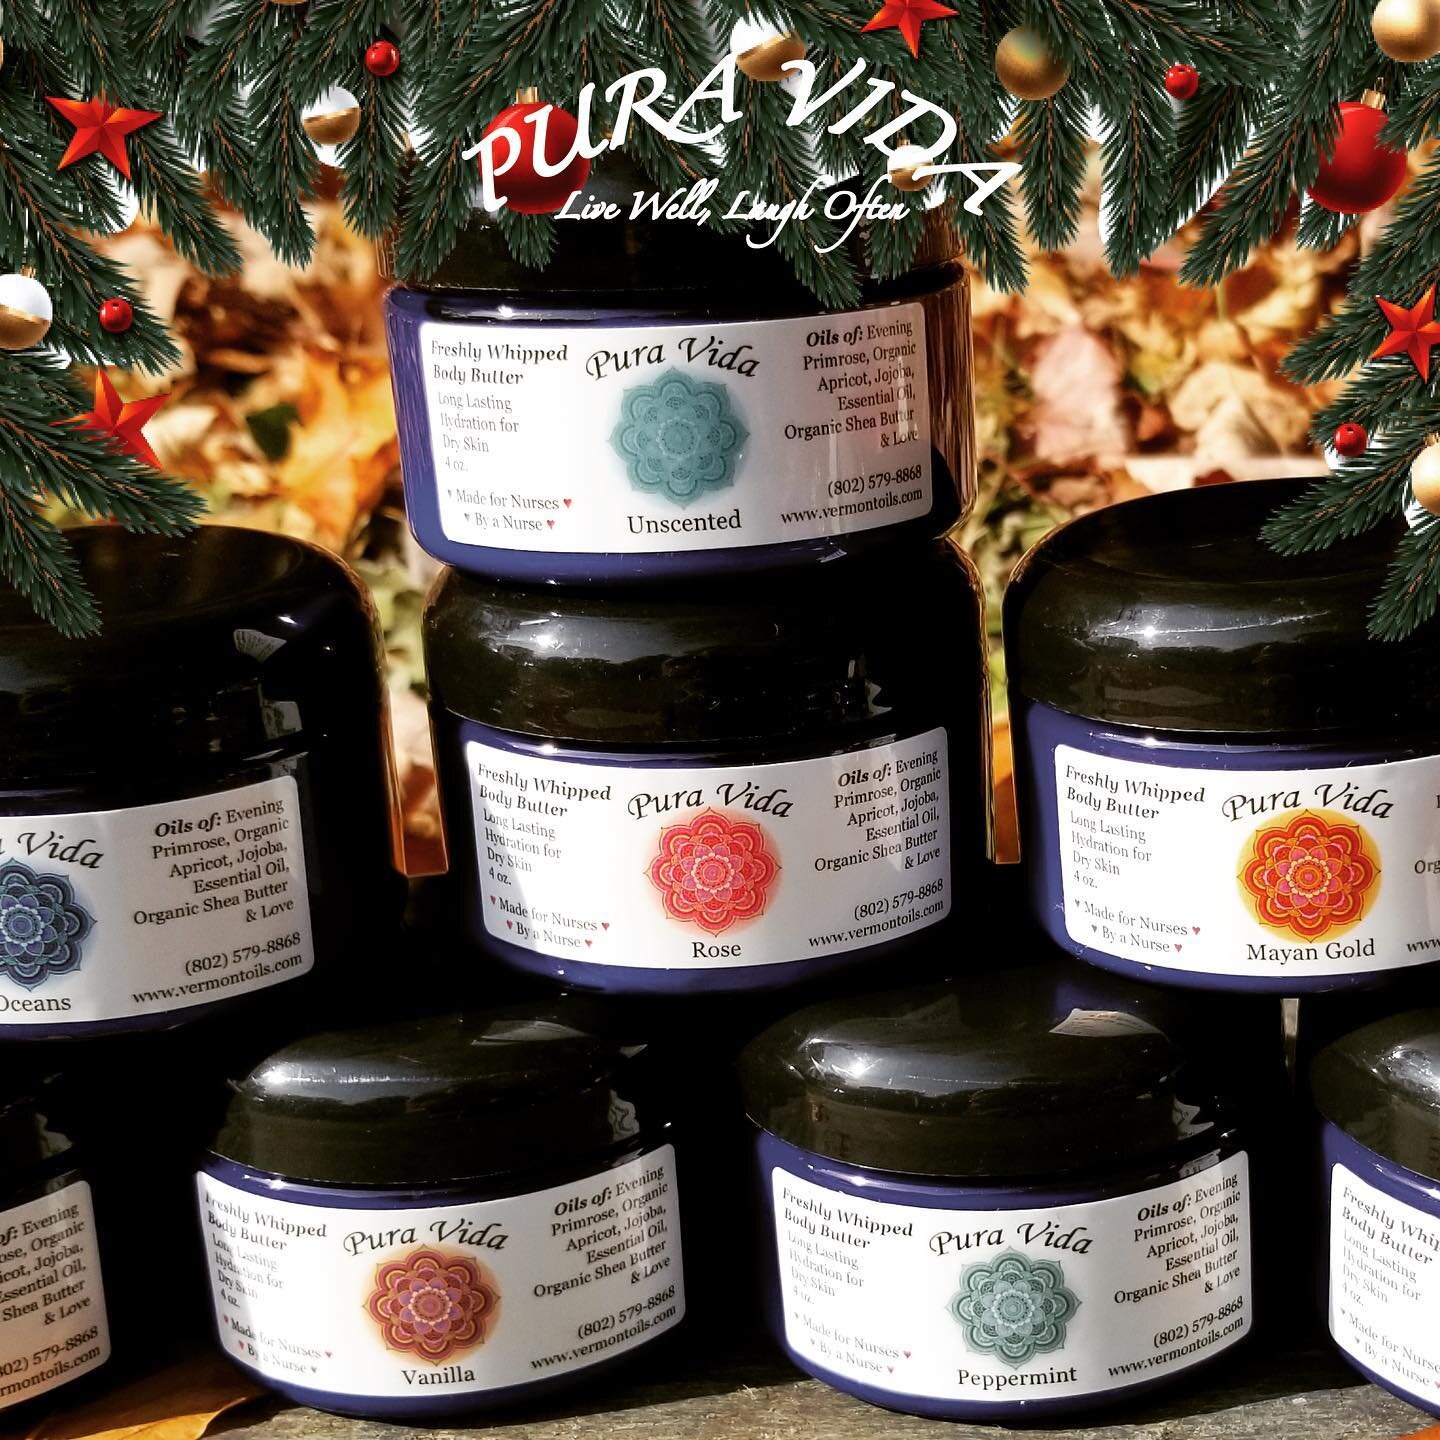 There is still time to get your orders in time for Christmas! Place orders by this Monday to take care of all your last minute bath and body care gift needs from our line of Vermont products made with love. www.puravidavt.com/ (link in bio)